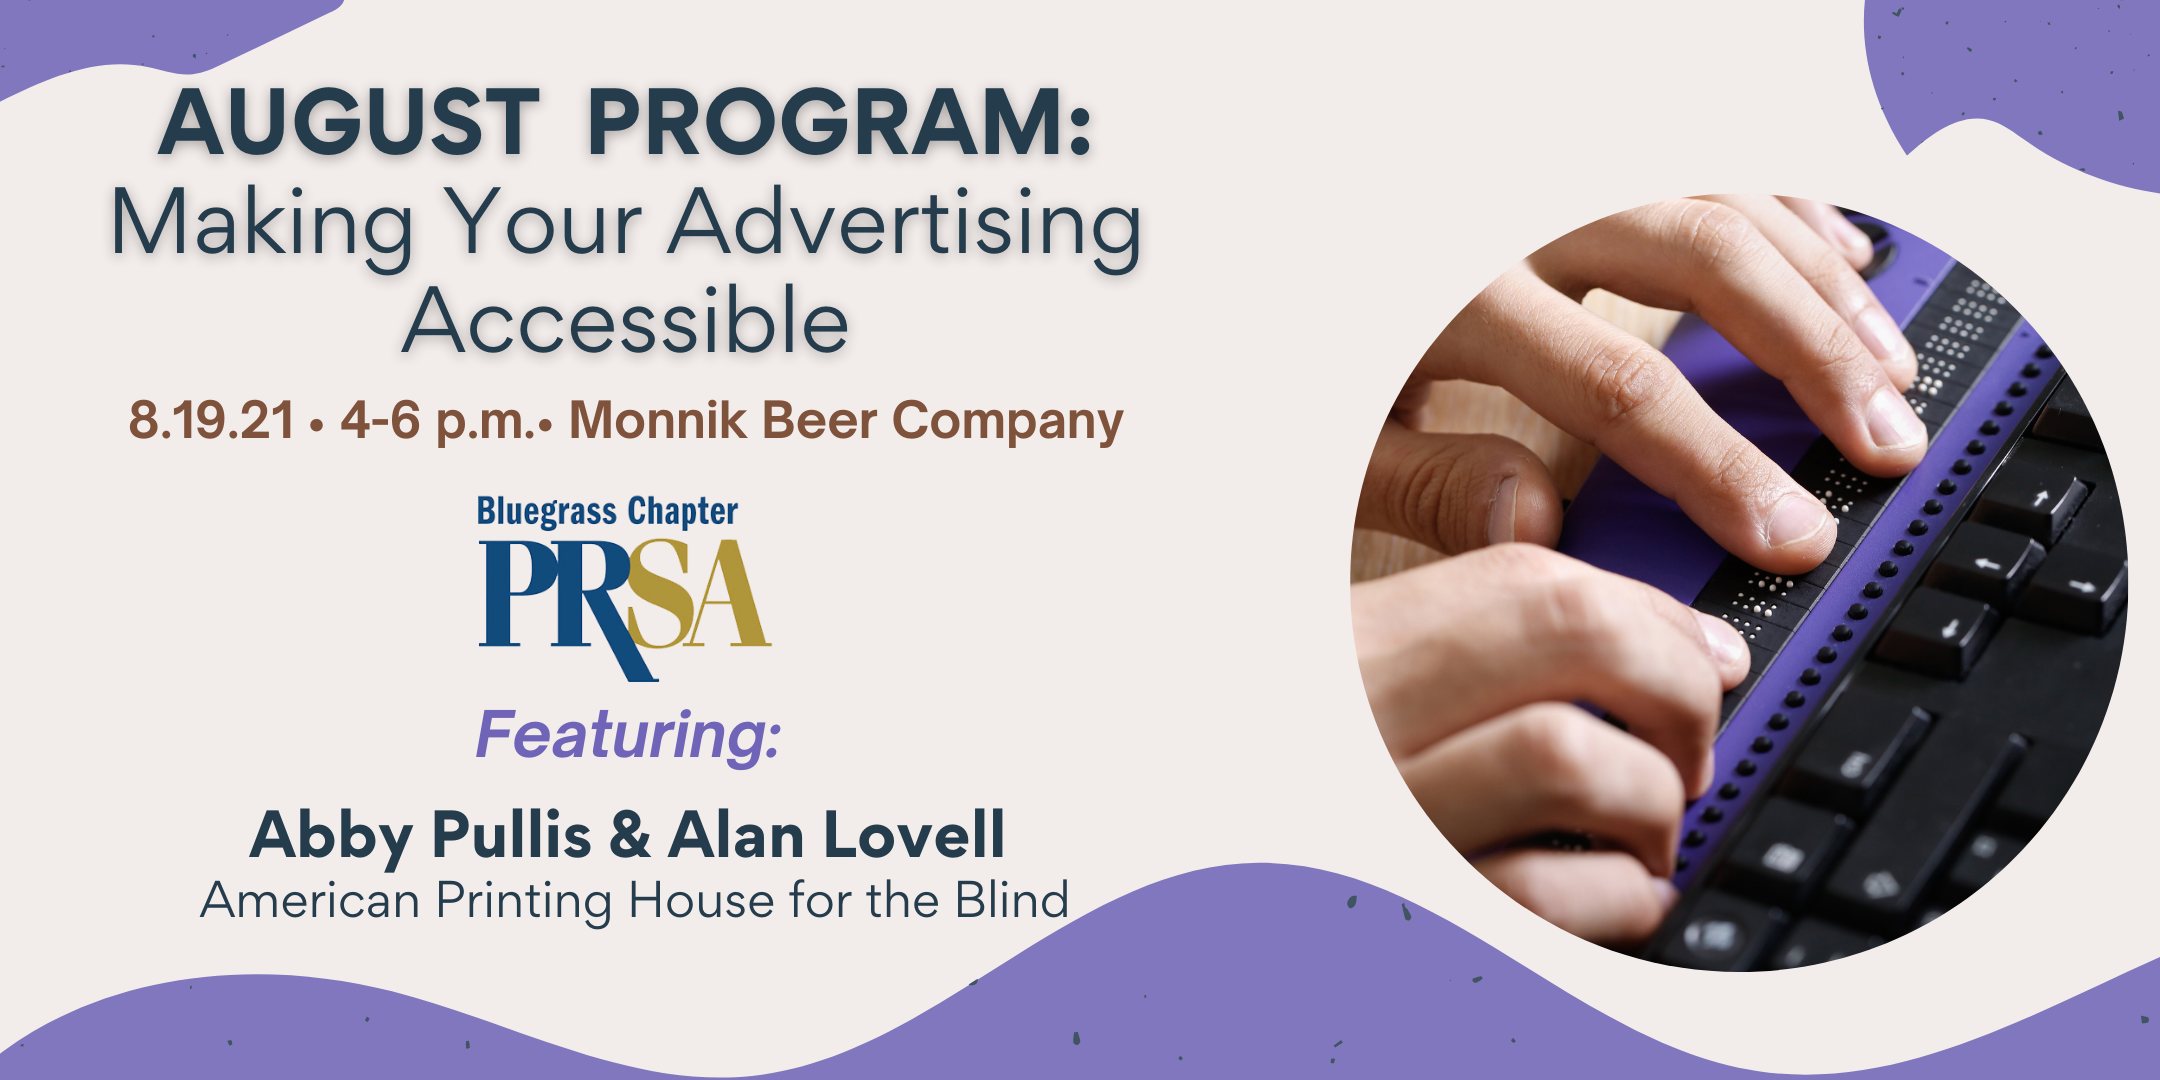 Join PRSA August 19 for tips on how to make your advertising more accessible